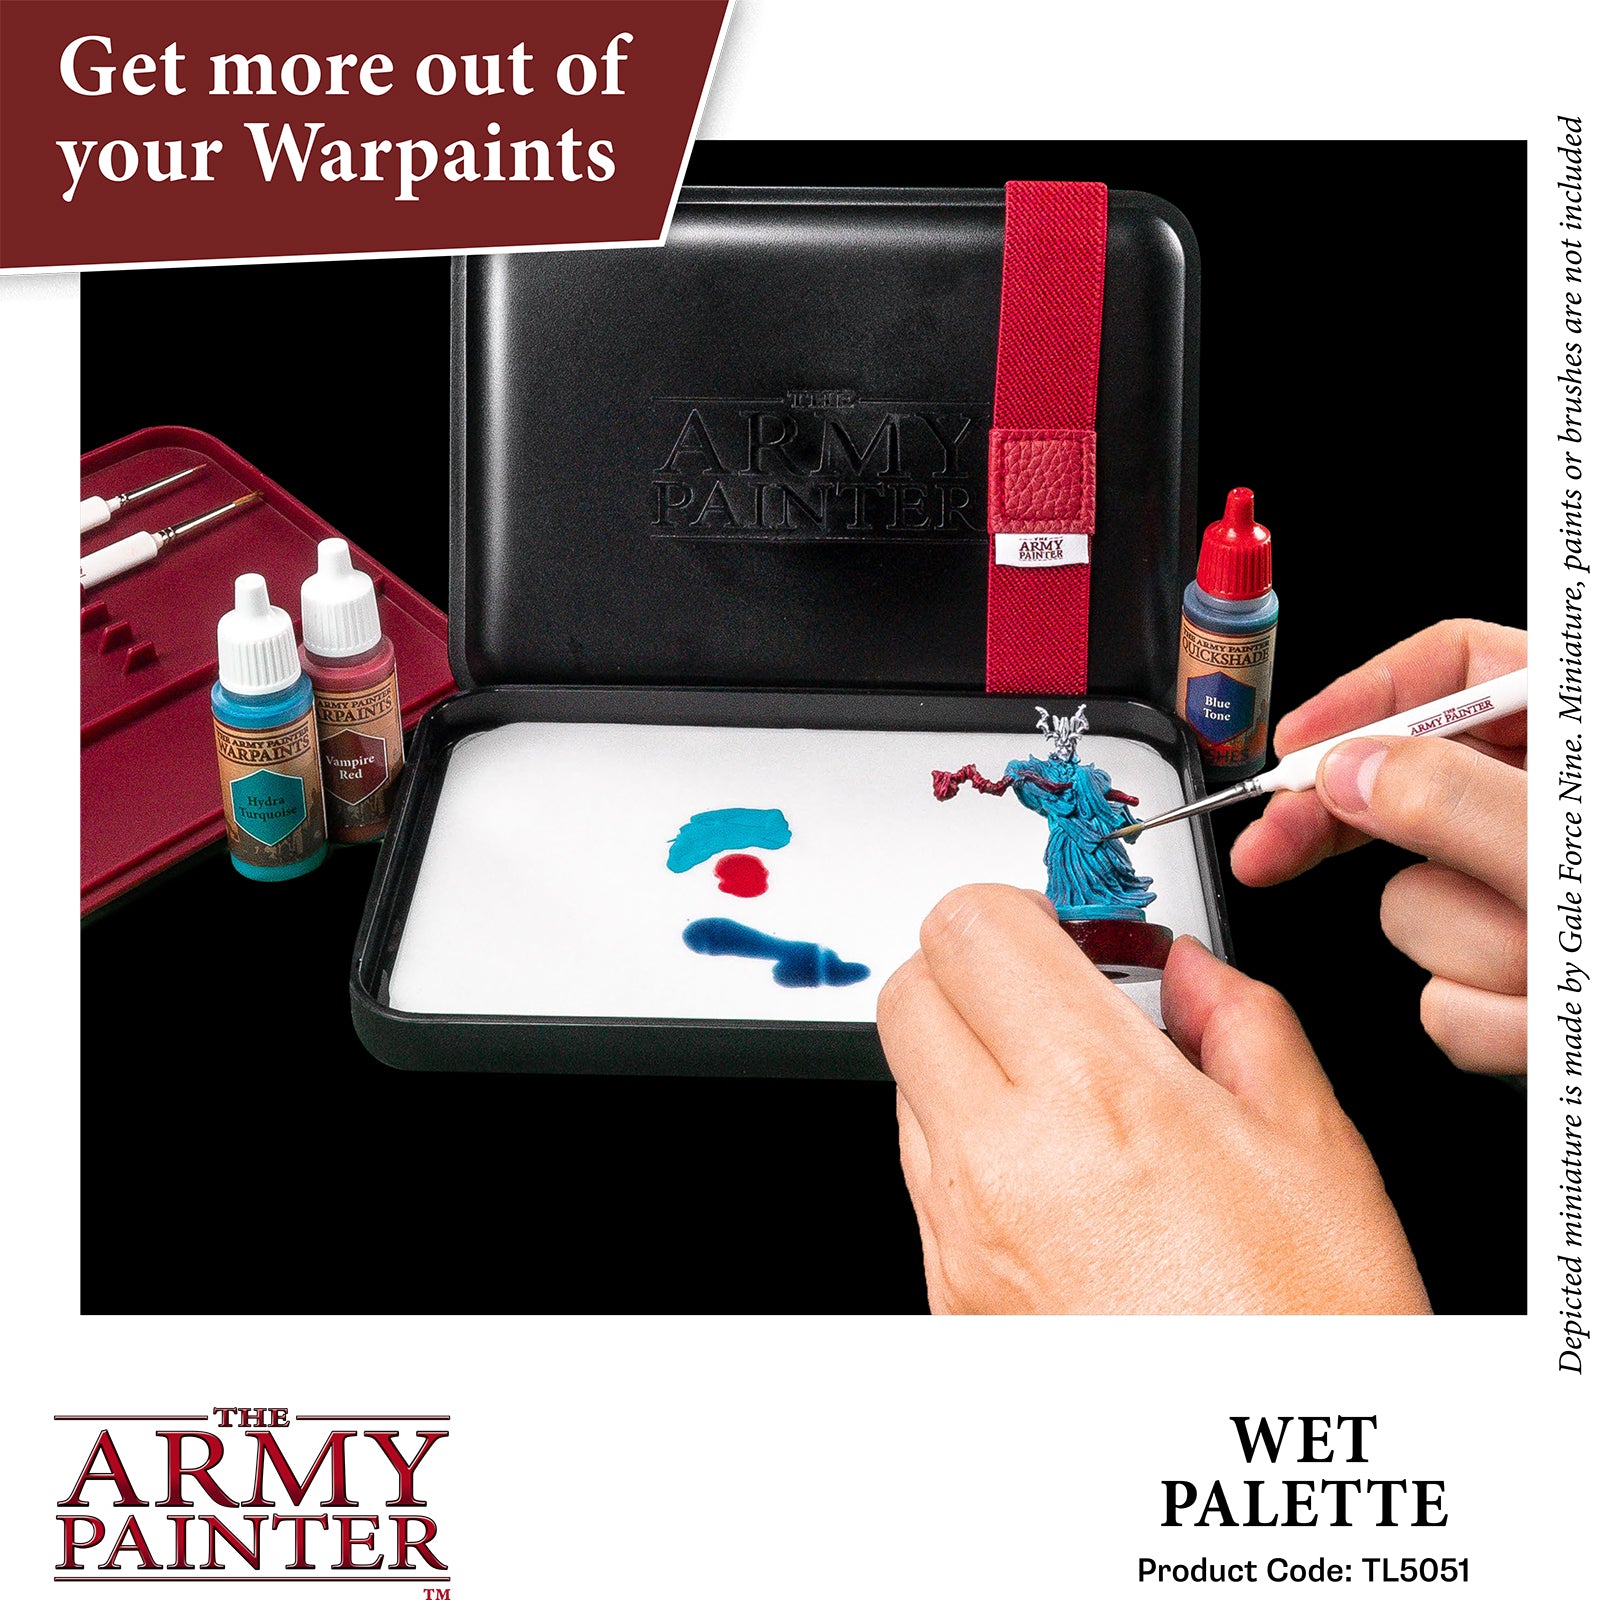 The Army Painter: Wet Palette